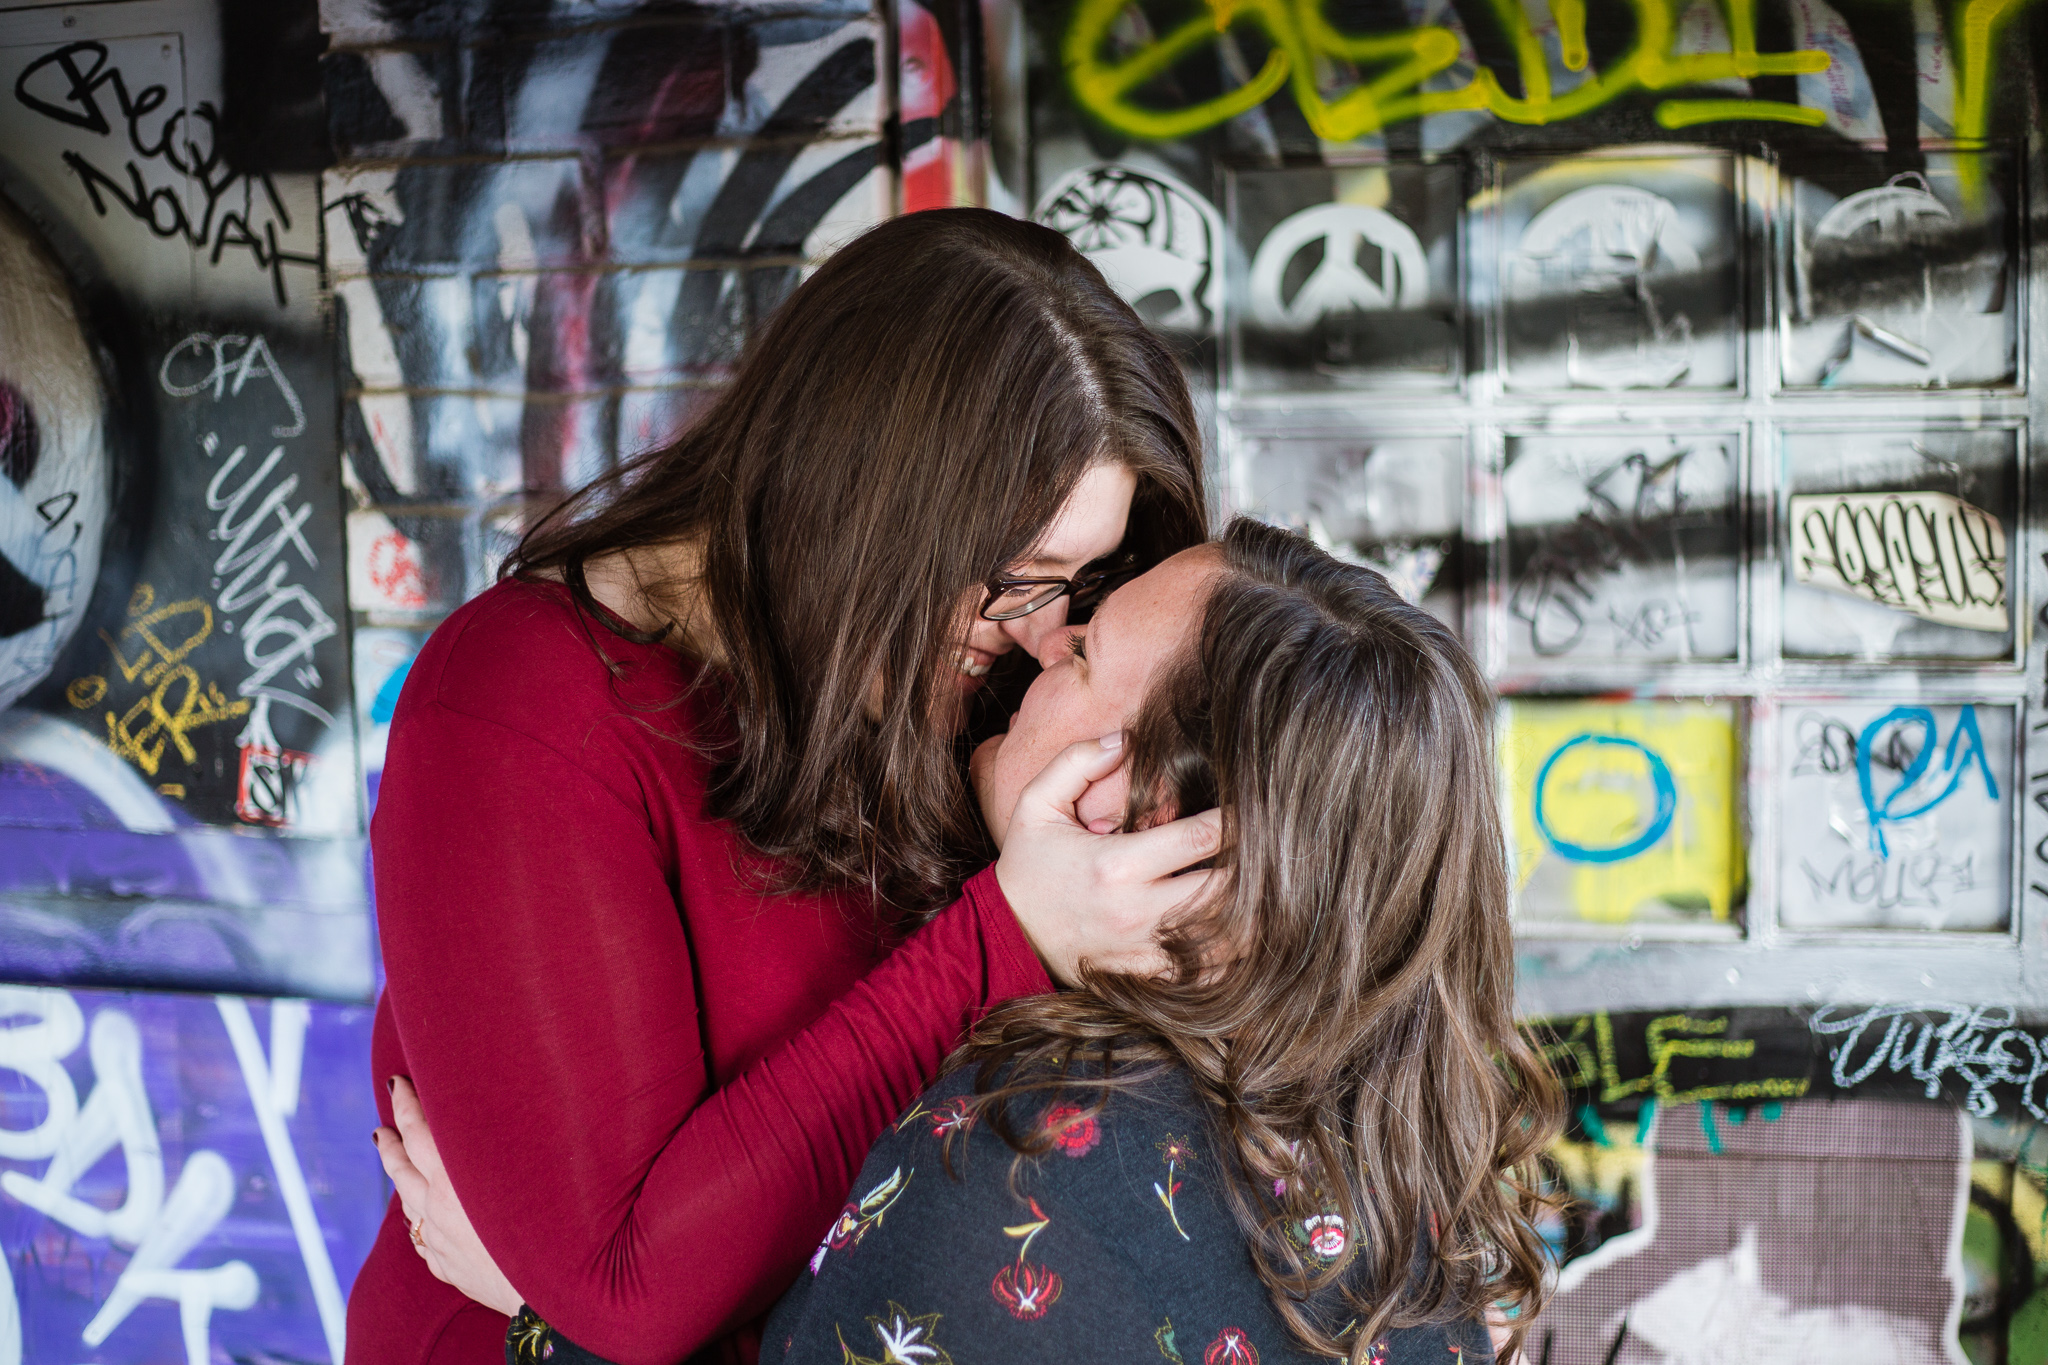 LGBT couple standing in front of a building covered in graffiti for their engagement photos on Roosevelt Row.